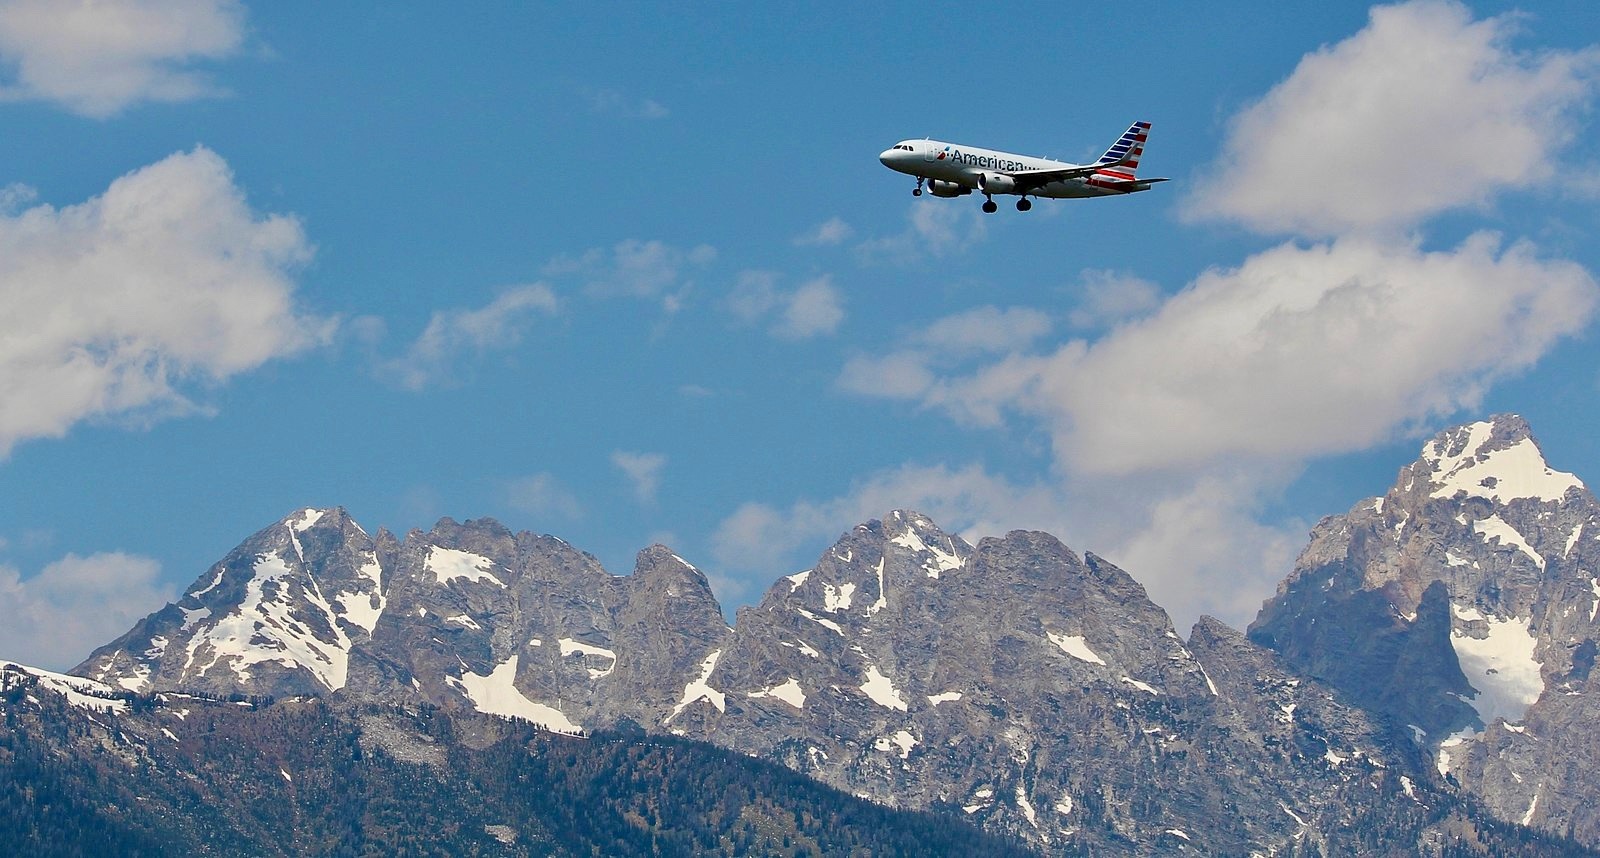 The tradeoffs of seeking prosperity: When Interior Secretary James Watt approved an extended special use permit for the Jackson Hole Airport in Grand Teton National Park in 1983, it not only cemented the presence of the airport but laid down the foundation for the facility to expand, the runway to be lengthened and number of flights to markedly increase.  A secondary impact is that it attracted fresh legions of second home owners and set off a development building boom. In addition, the fenced airport grounds represent a significant obstacle to wildlife movement and the sounds of jet aircraft detract from the setting. Photo courtesy Wikimedia/ WikiSniki17/Share-Alike 4.0 International License